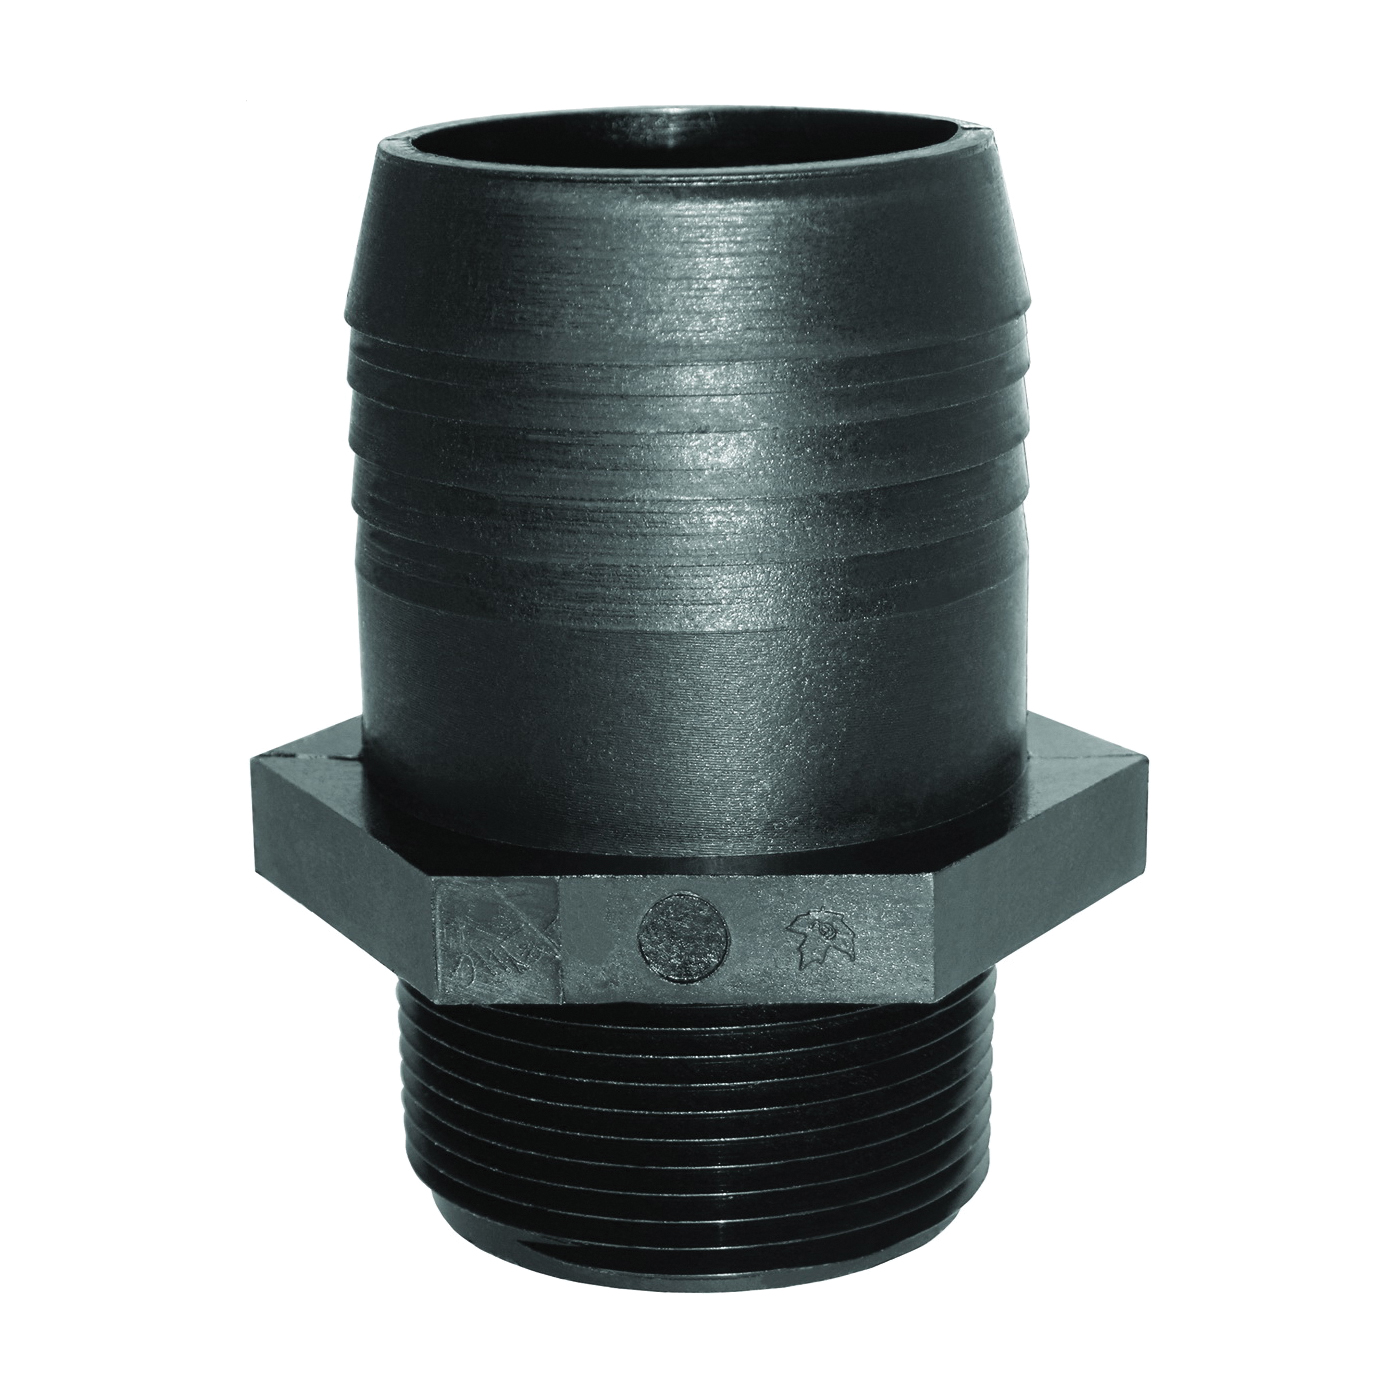 A1010P Adapter, 1 in, MPT x Hose Barb, Polypropylene